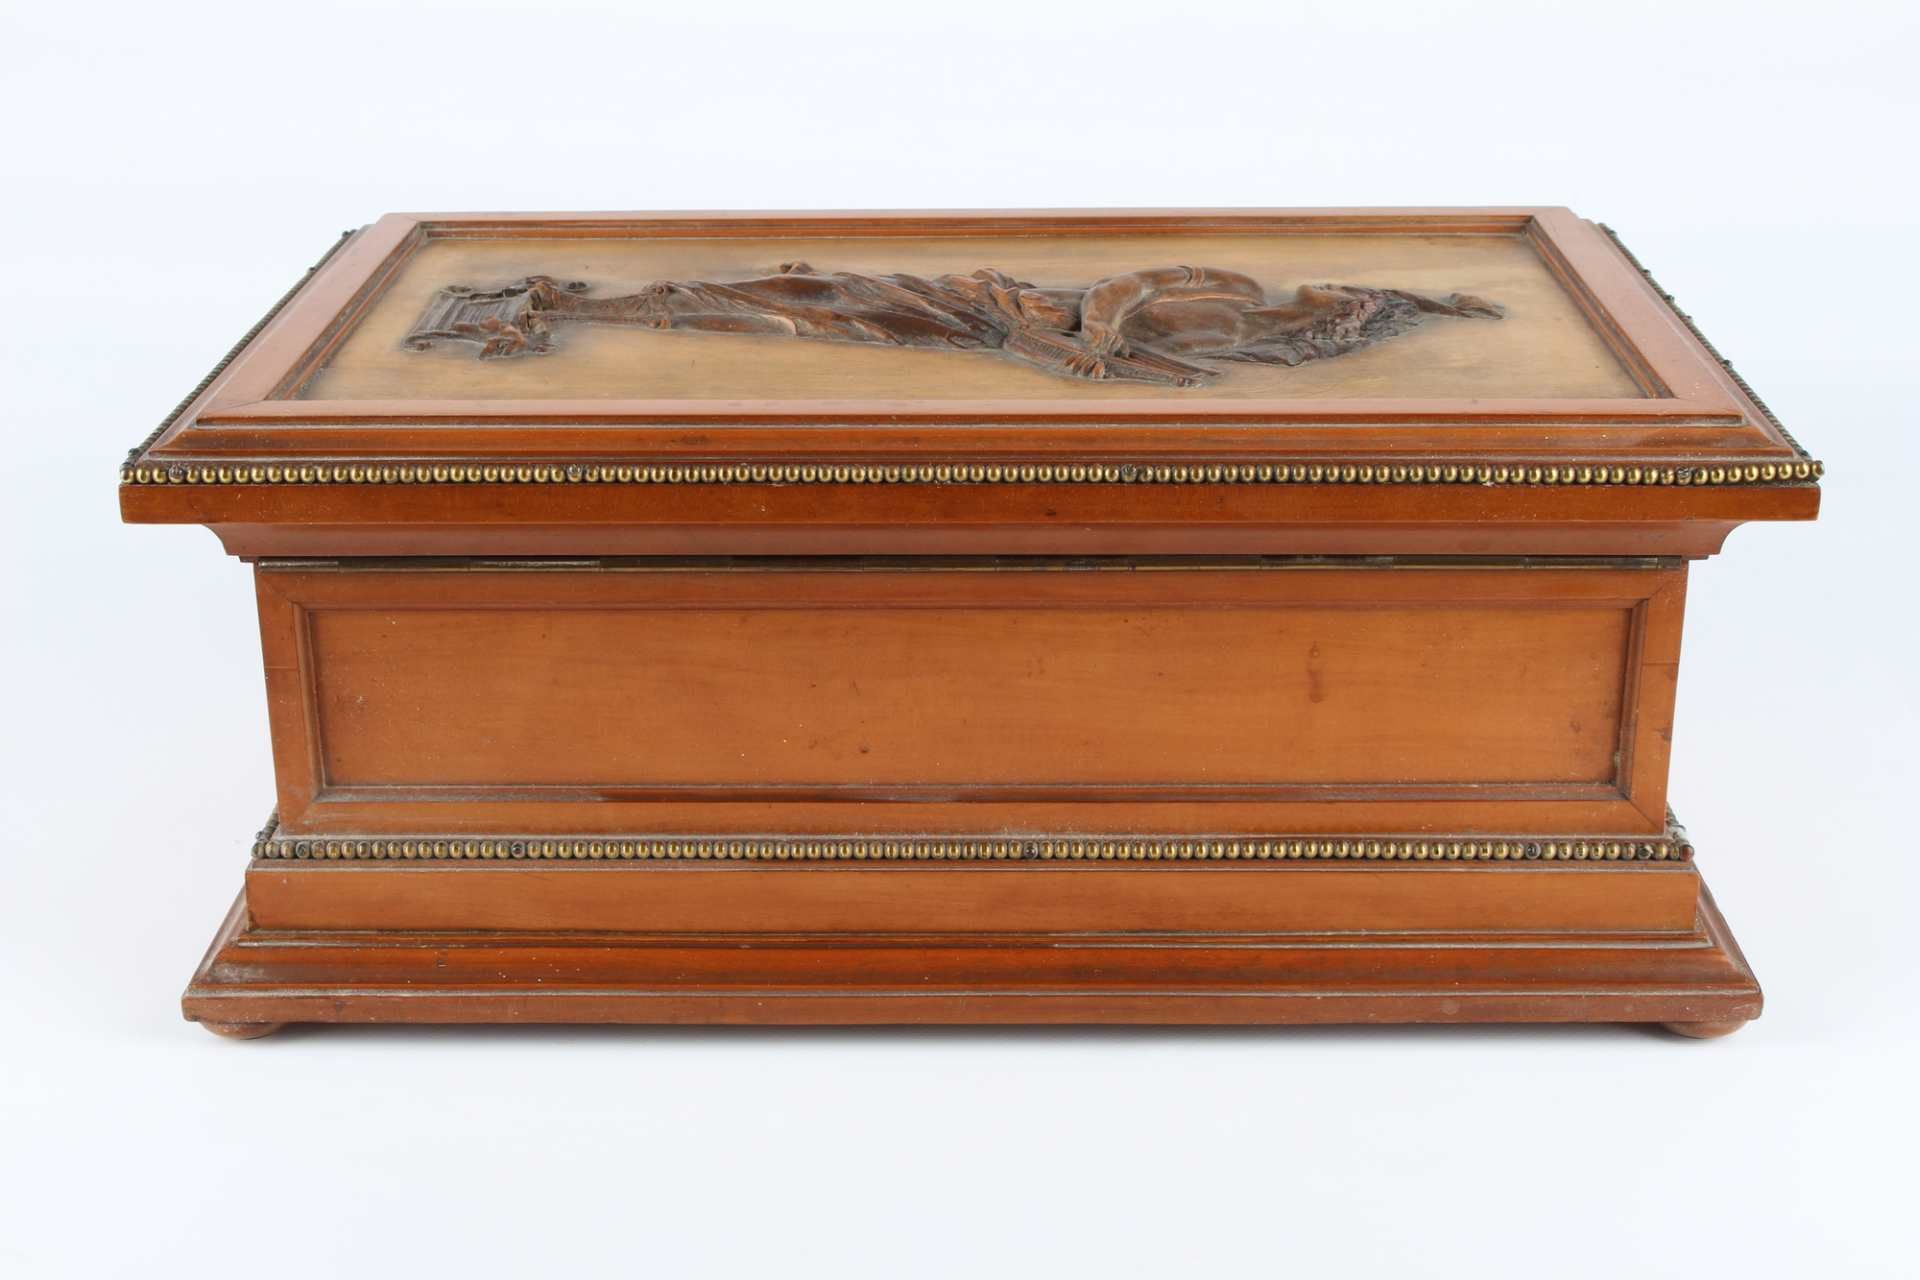 Russische Holztruhe mit Muse Erato, Moskau, russian wooden box with greek muse Erato, - Image 6 of 8